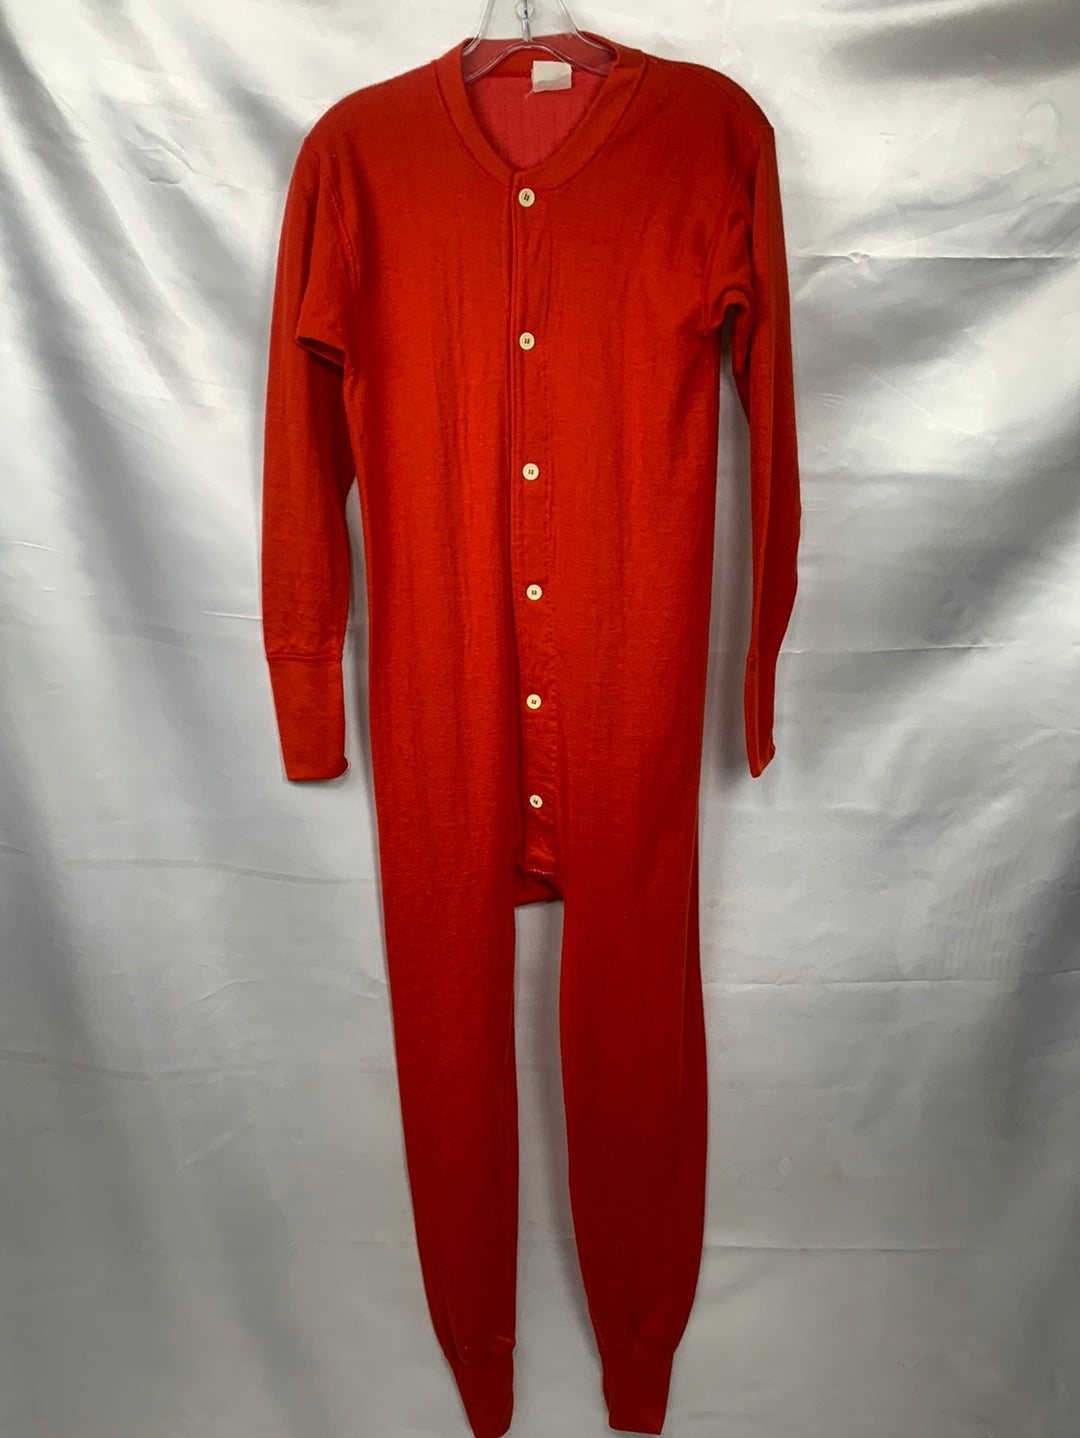 Union Suit Long Johns Thermal Underwear Mens 38 -40 Red